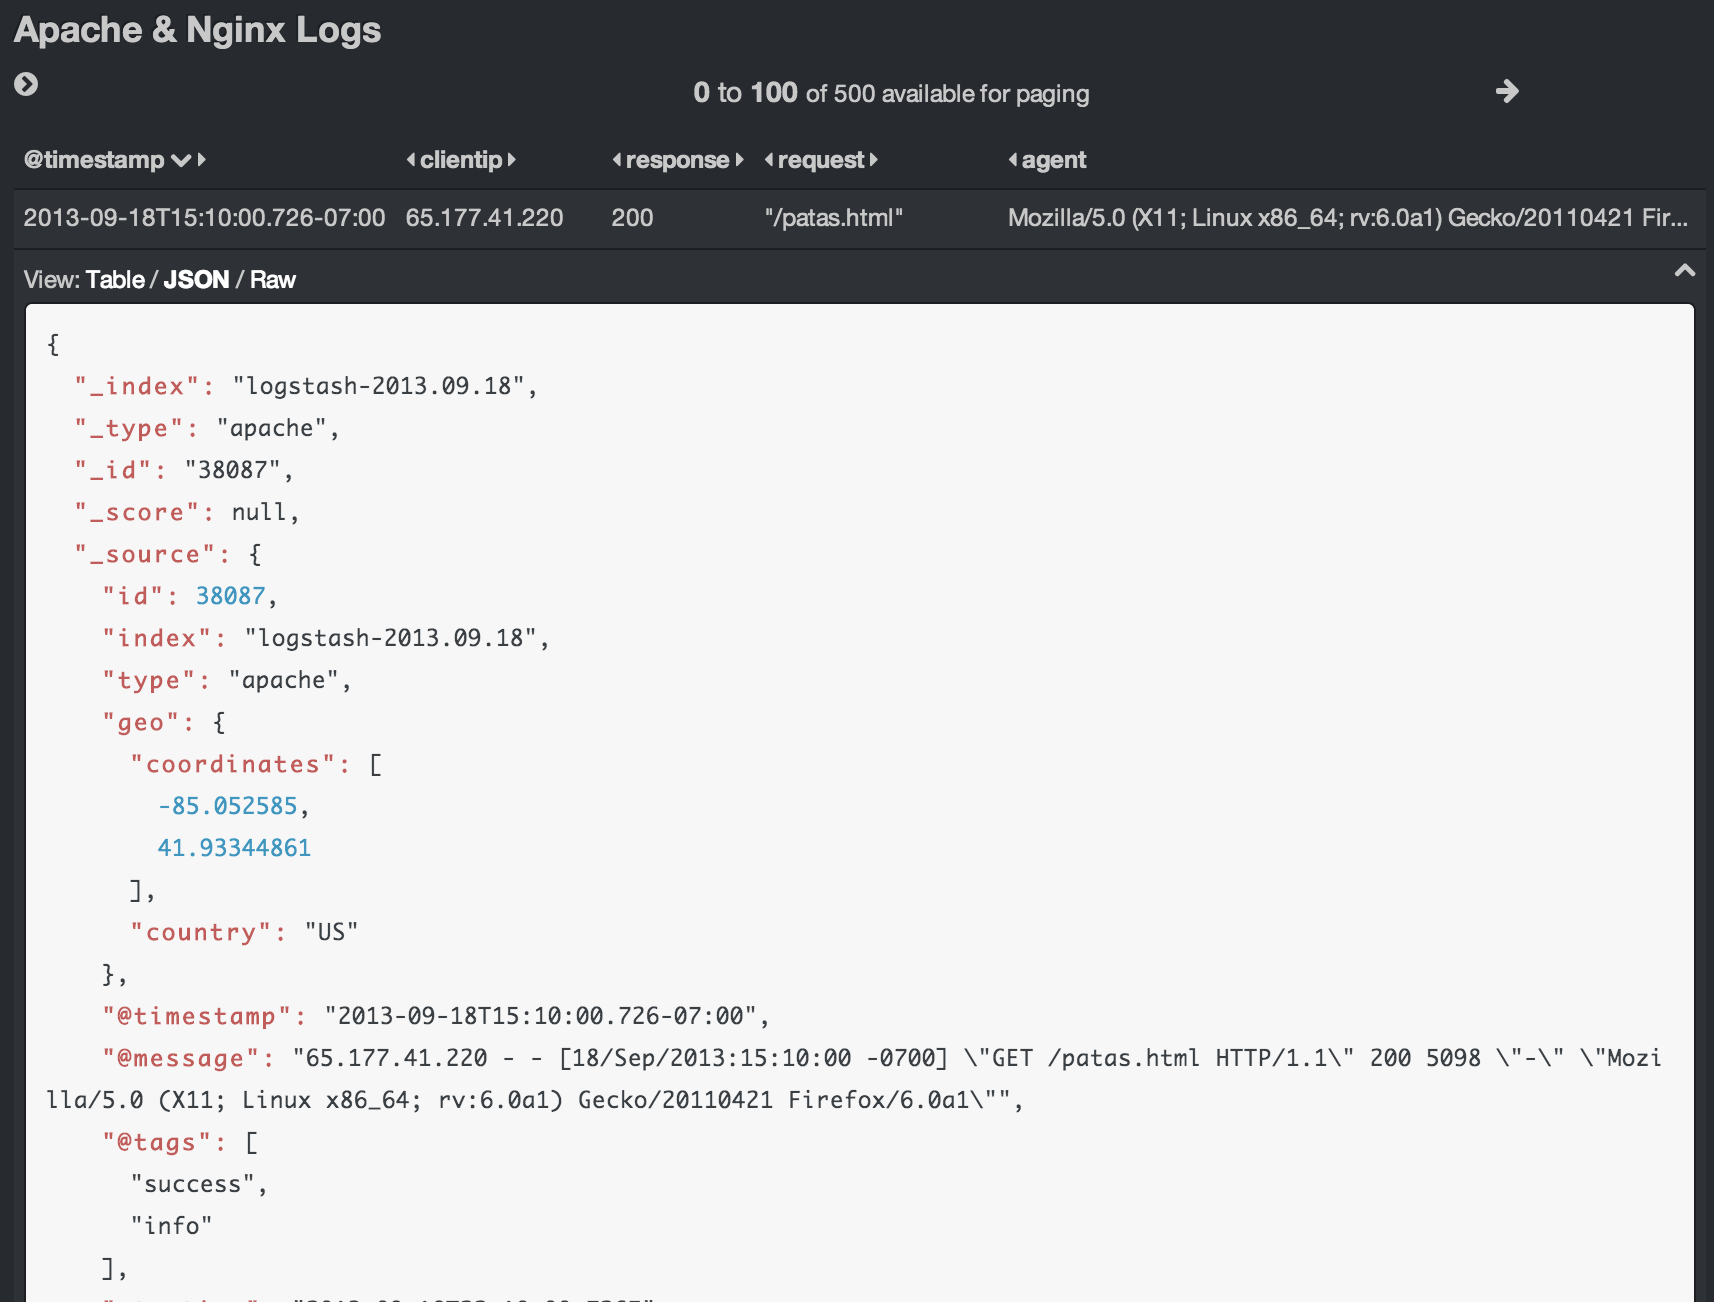 kibana-2013-09-19-about-that-details-view.png